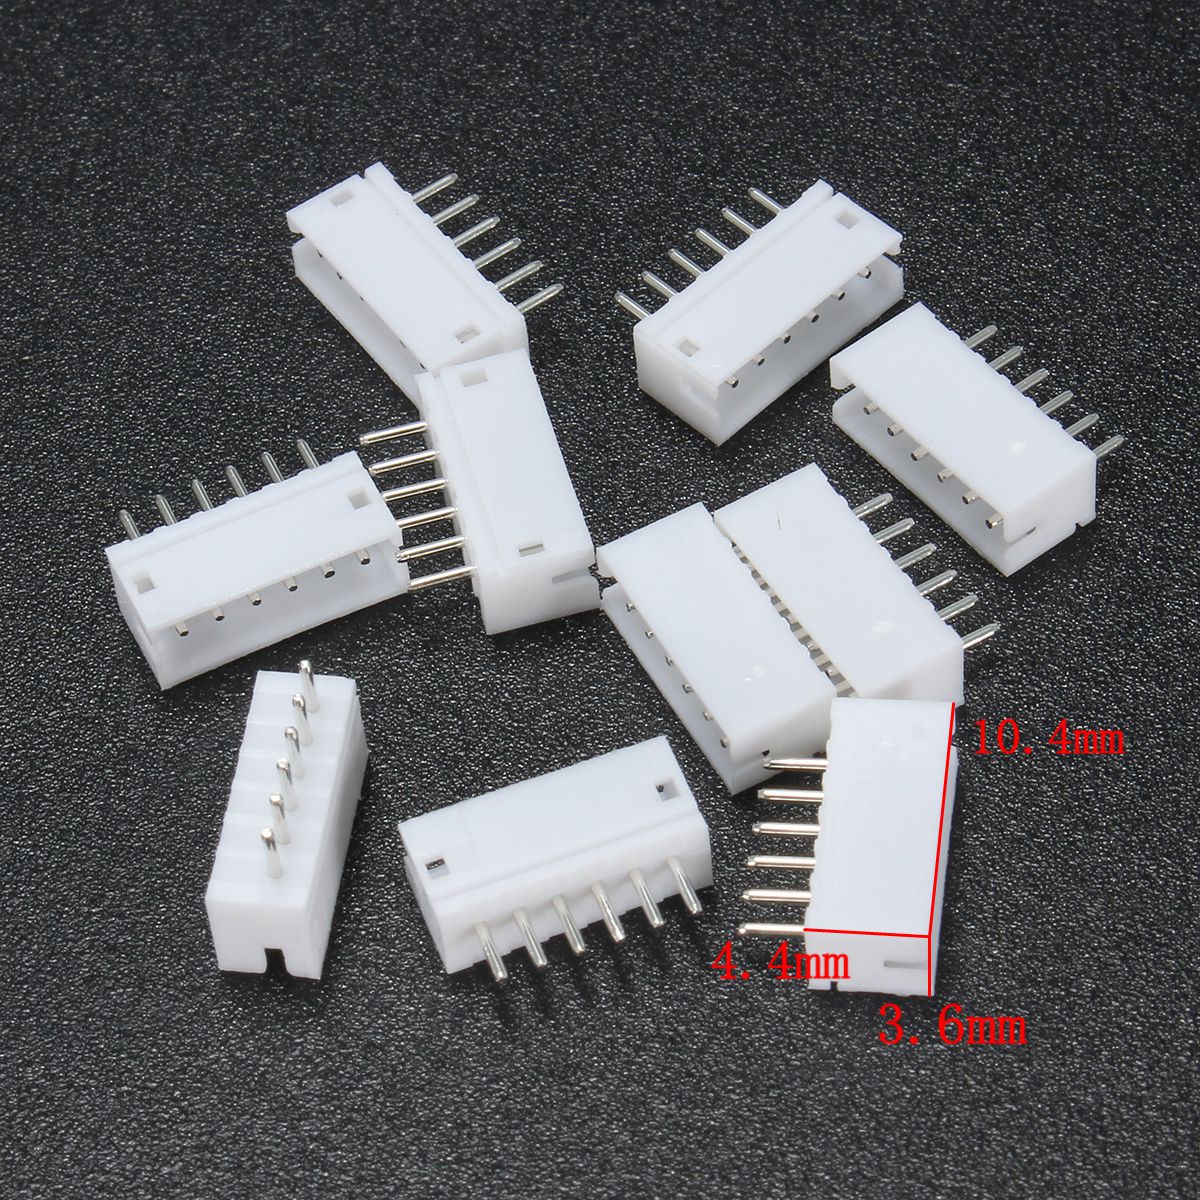 Excellwayreg-Mini-Micro-JST-15mm-ZH-6-Pin-Connector-Plug-and-Wires-Cables-15cm-10-Set-1170230-9